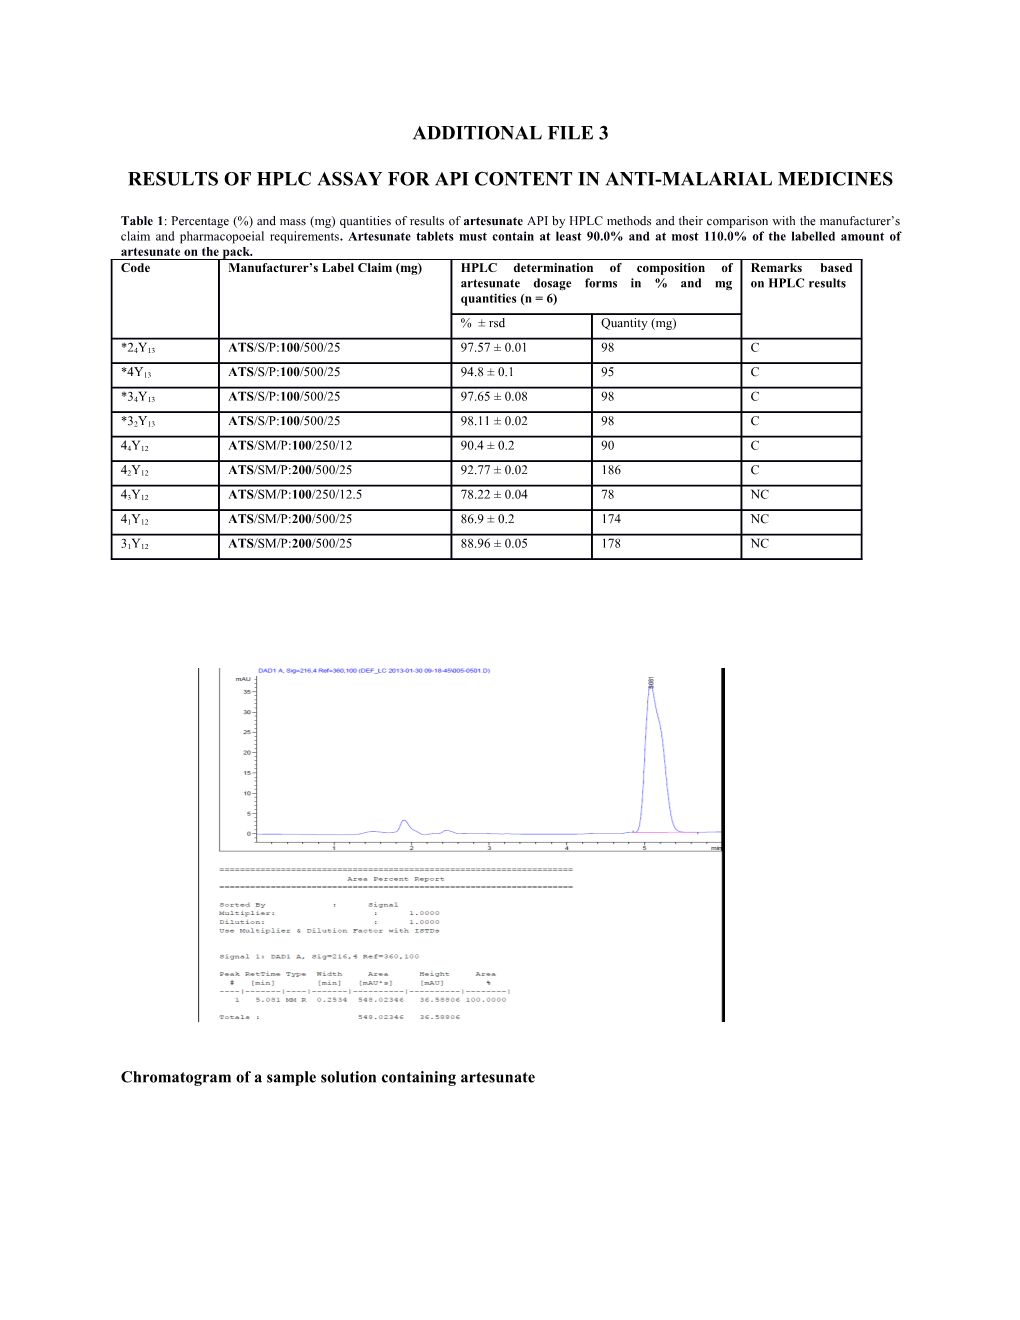 Results of Hplc Assay for Api Content in Anti-Malarial Medicines